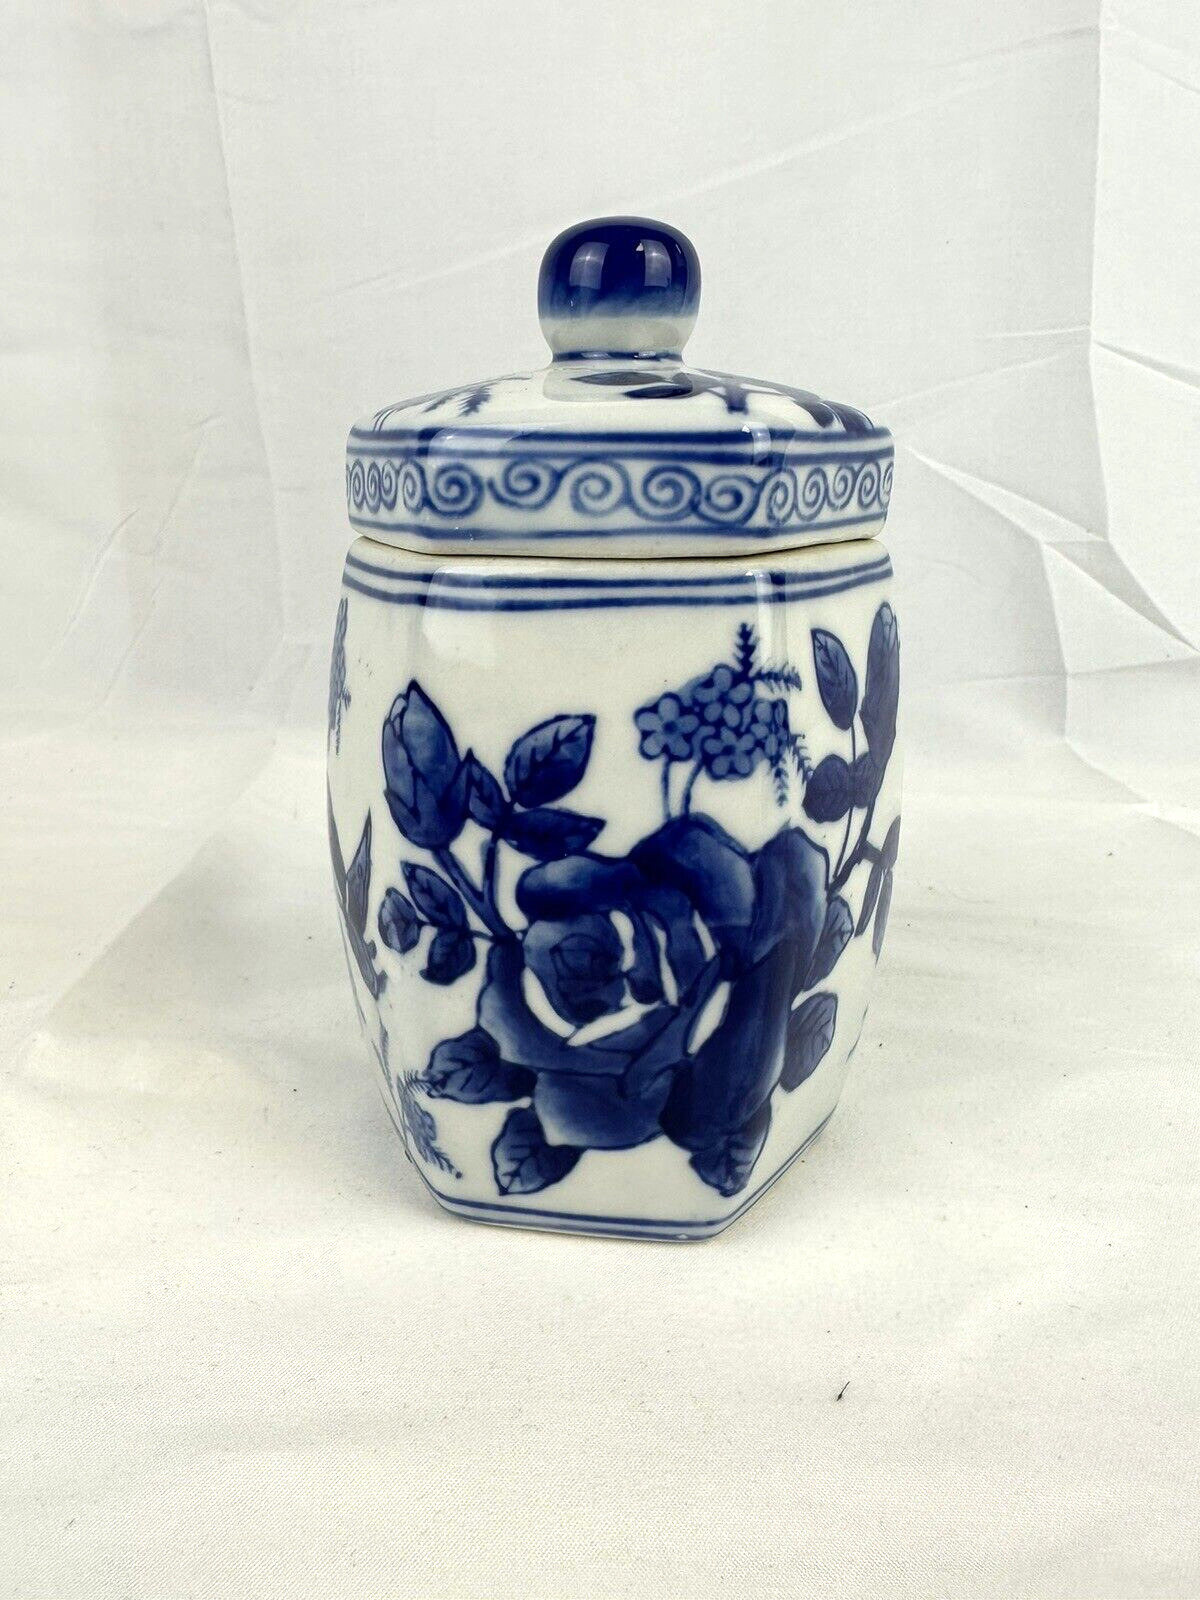 Vintage Lidded Jar Blue and White Porcelain Roses Butterflies Chinese Signed B13